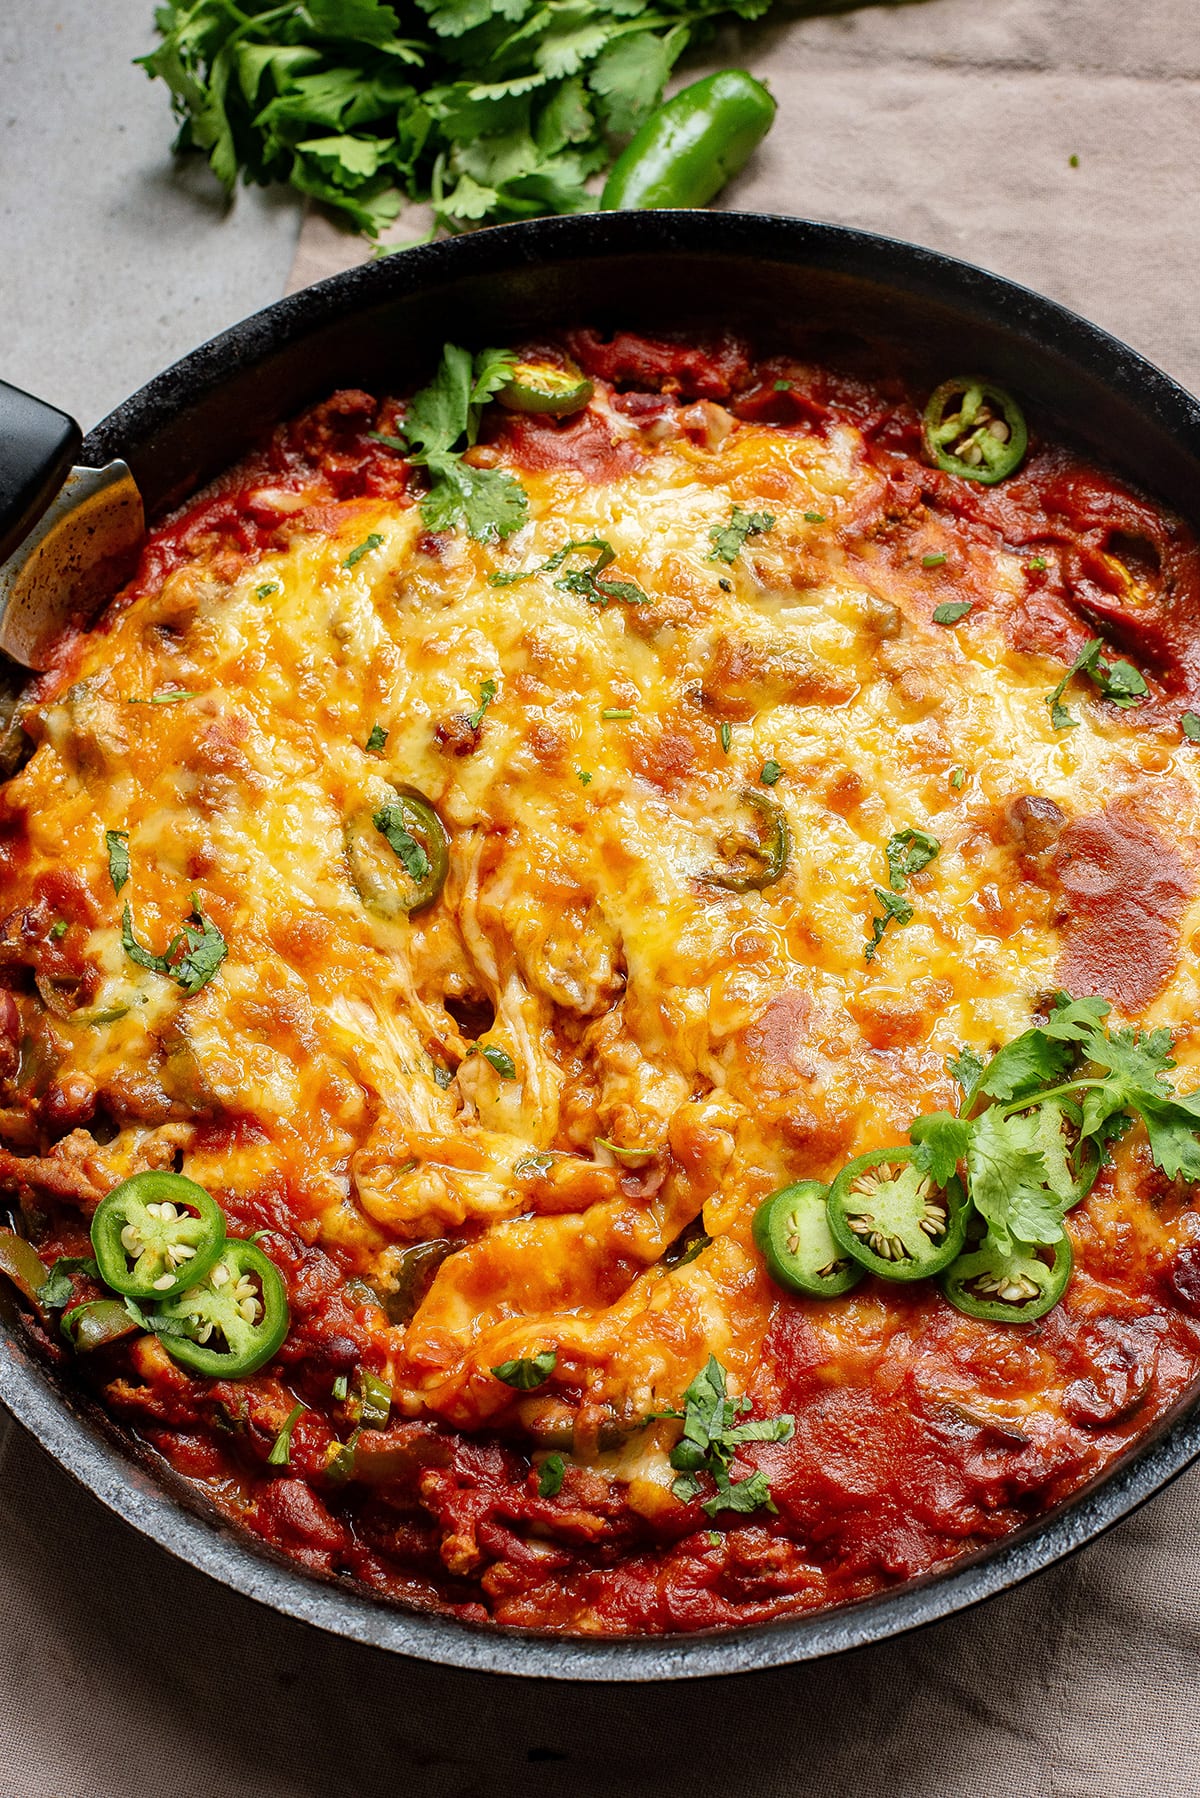 Mexican casserole with ground beef and beans and melted cheese on top